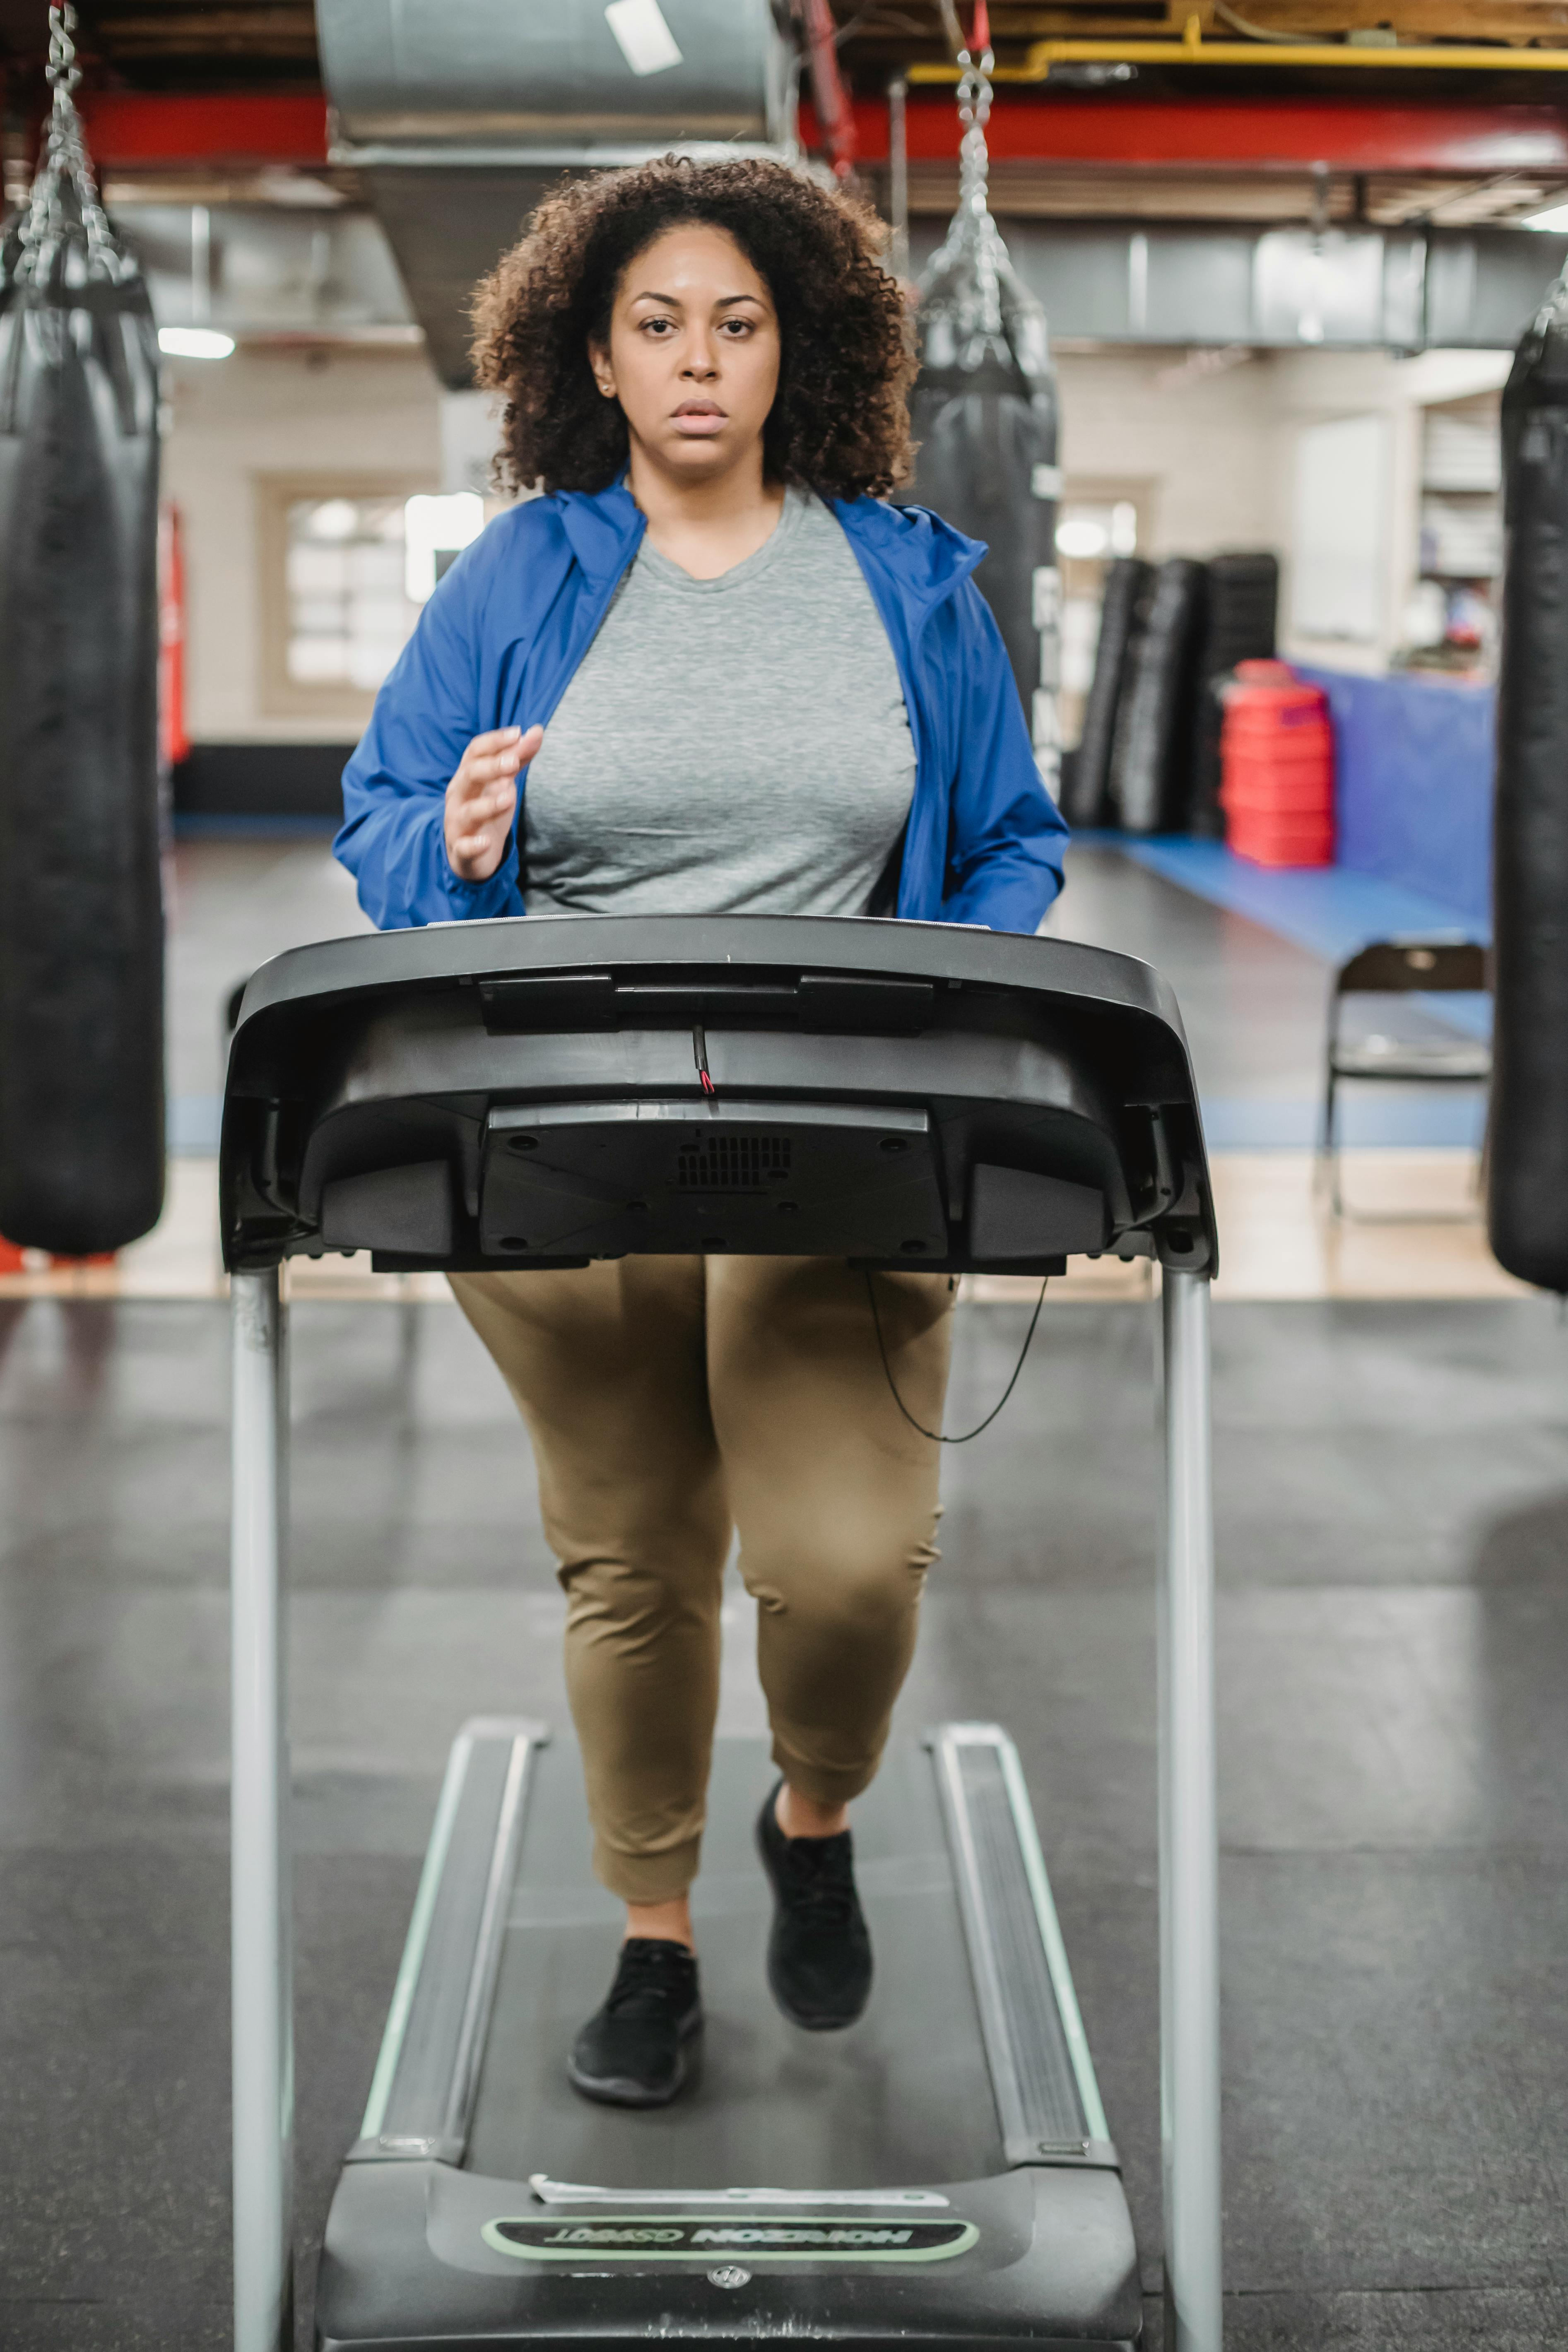 thoughtful woman training on treadmill in fitness club